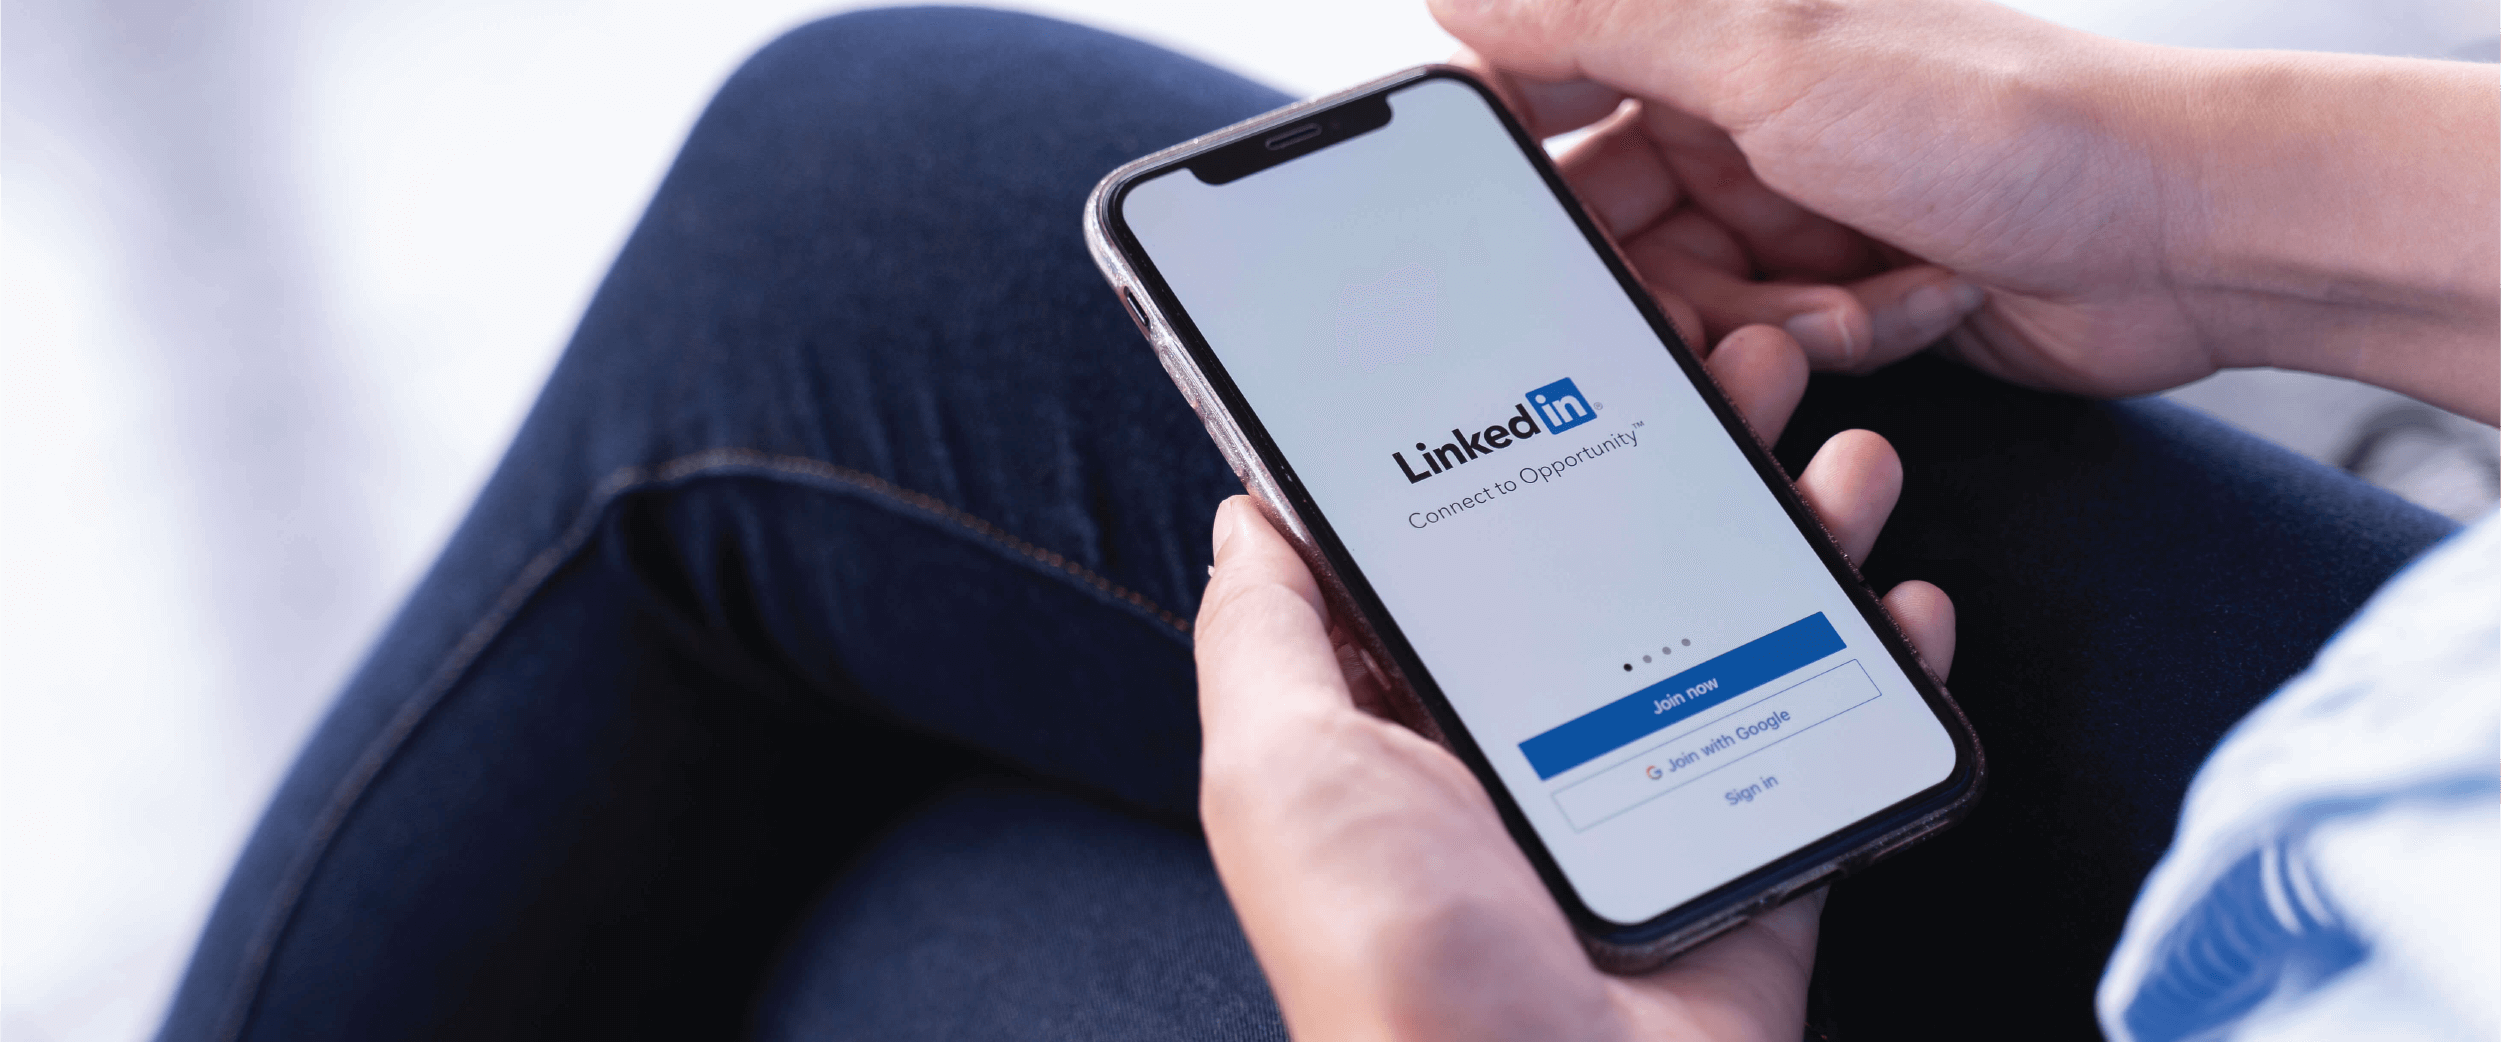 How to Grow Your Network on LinkedIn